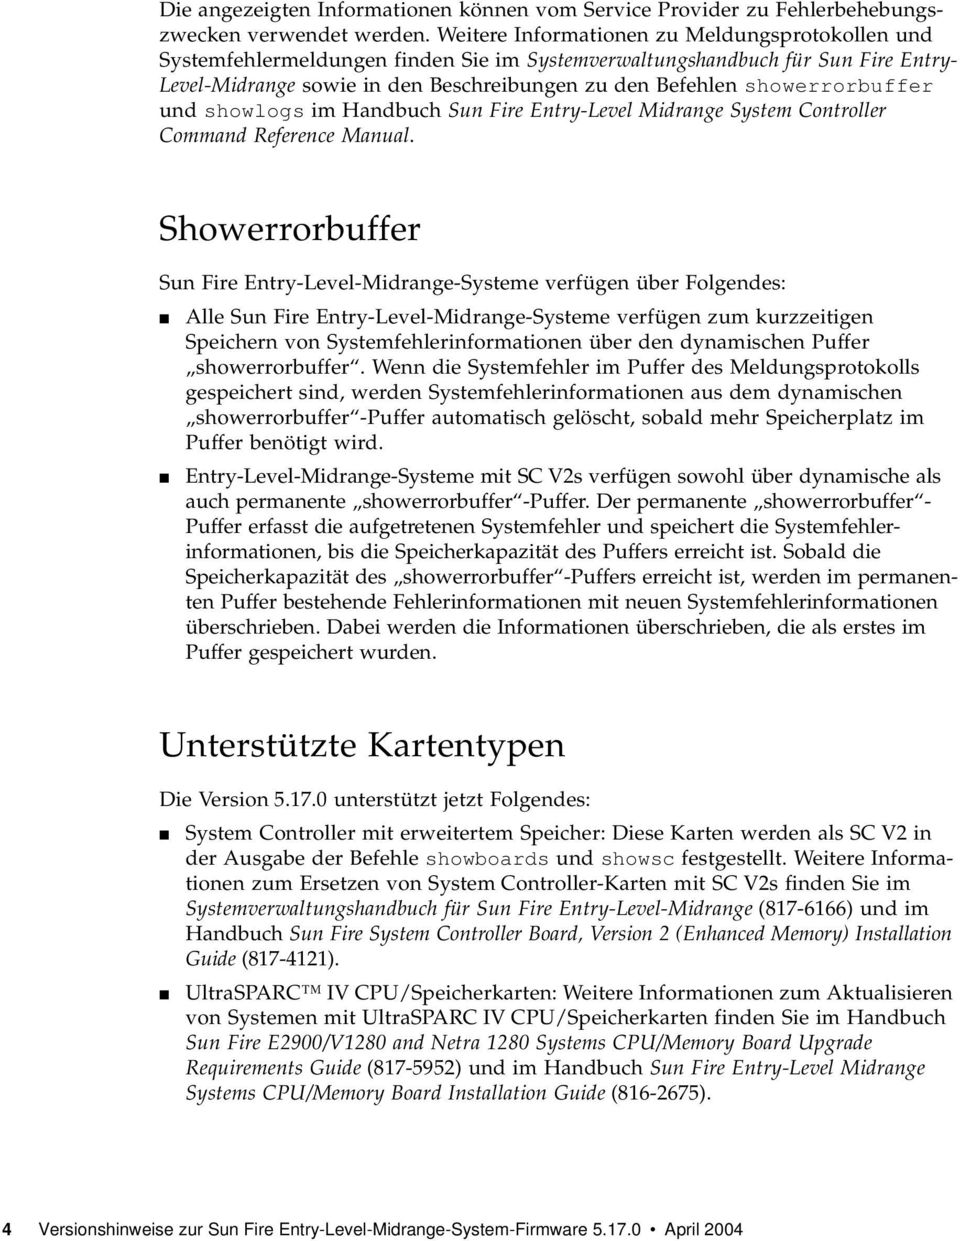 showerrorbuffer und showlogs im Handbuch Sun Fire Entry-Level Midrange System Controller Command Reference Manual.